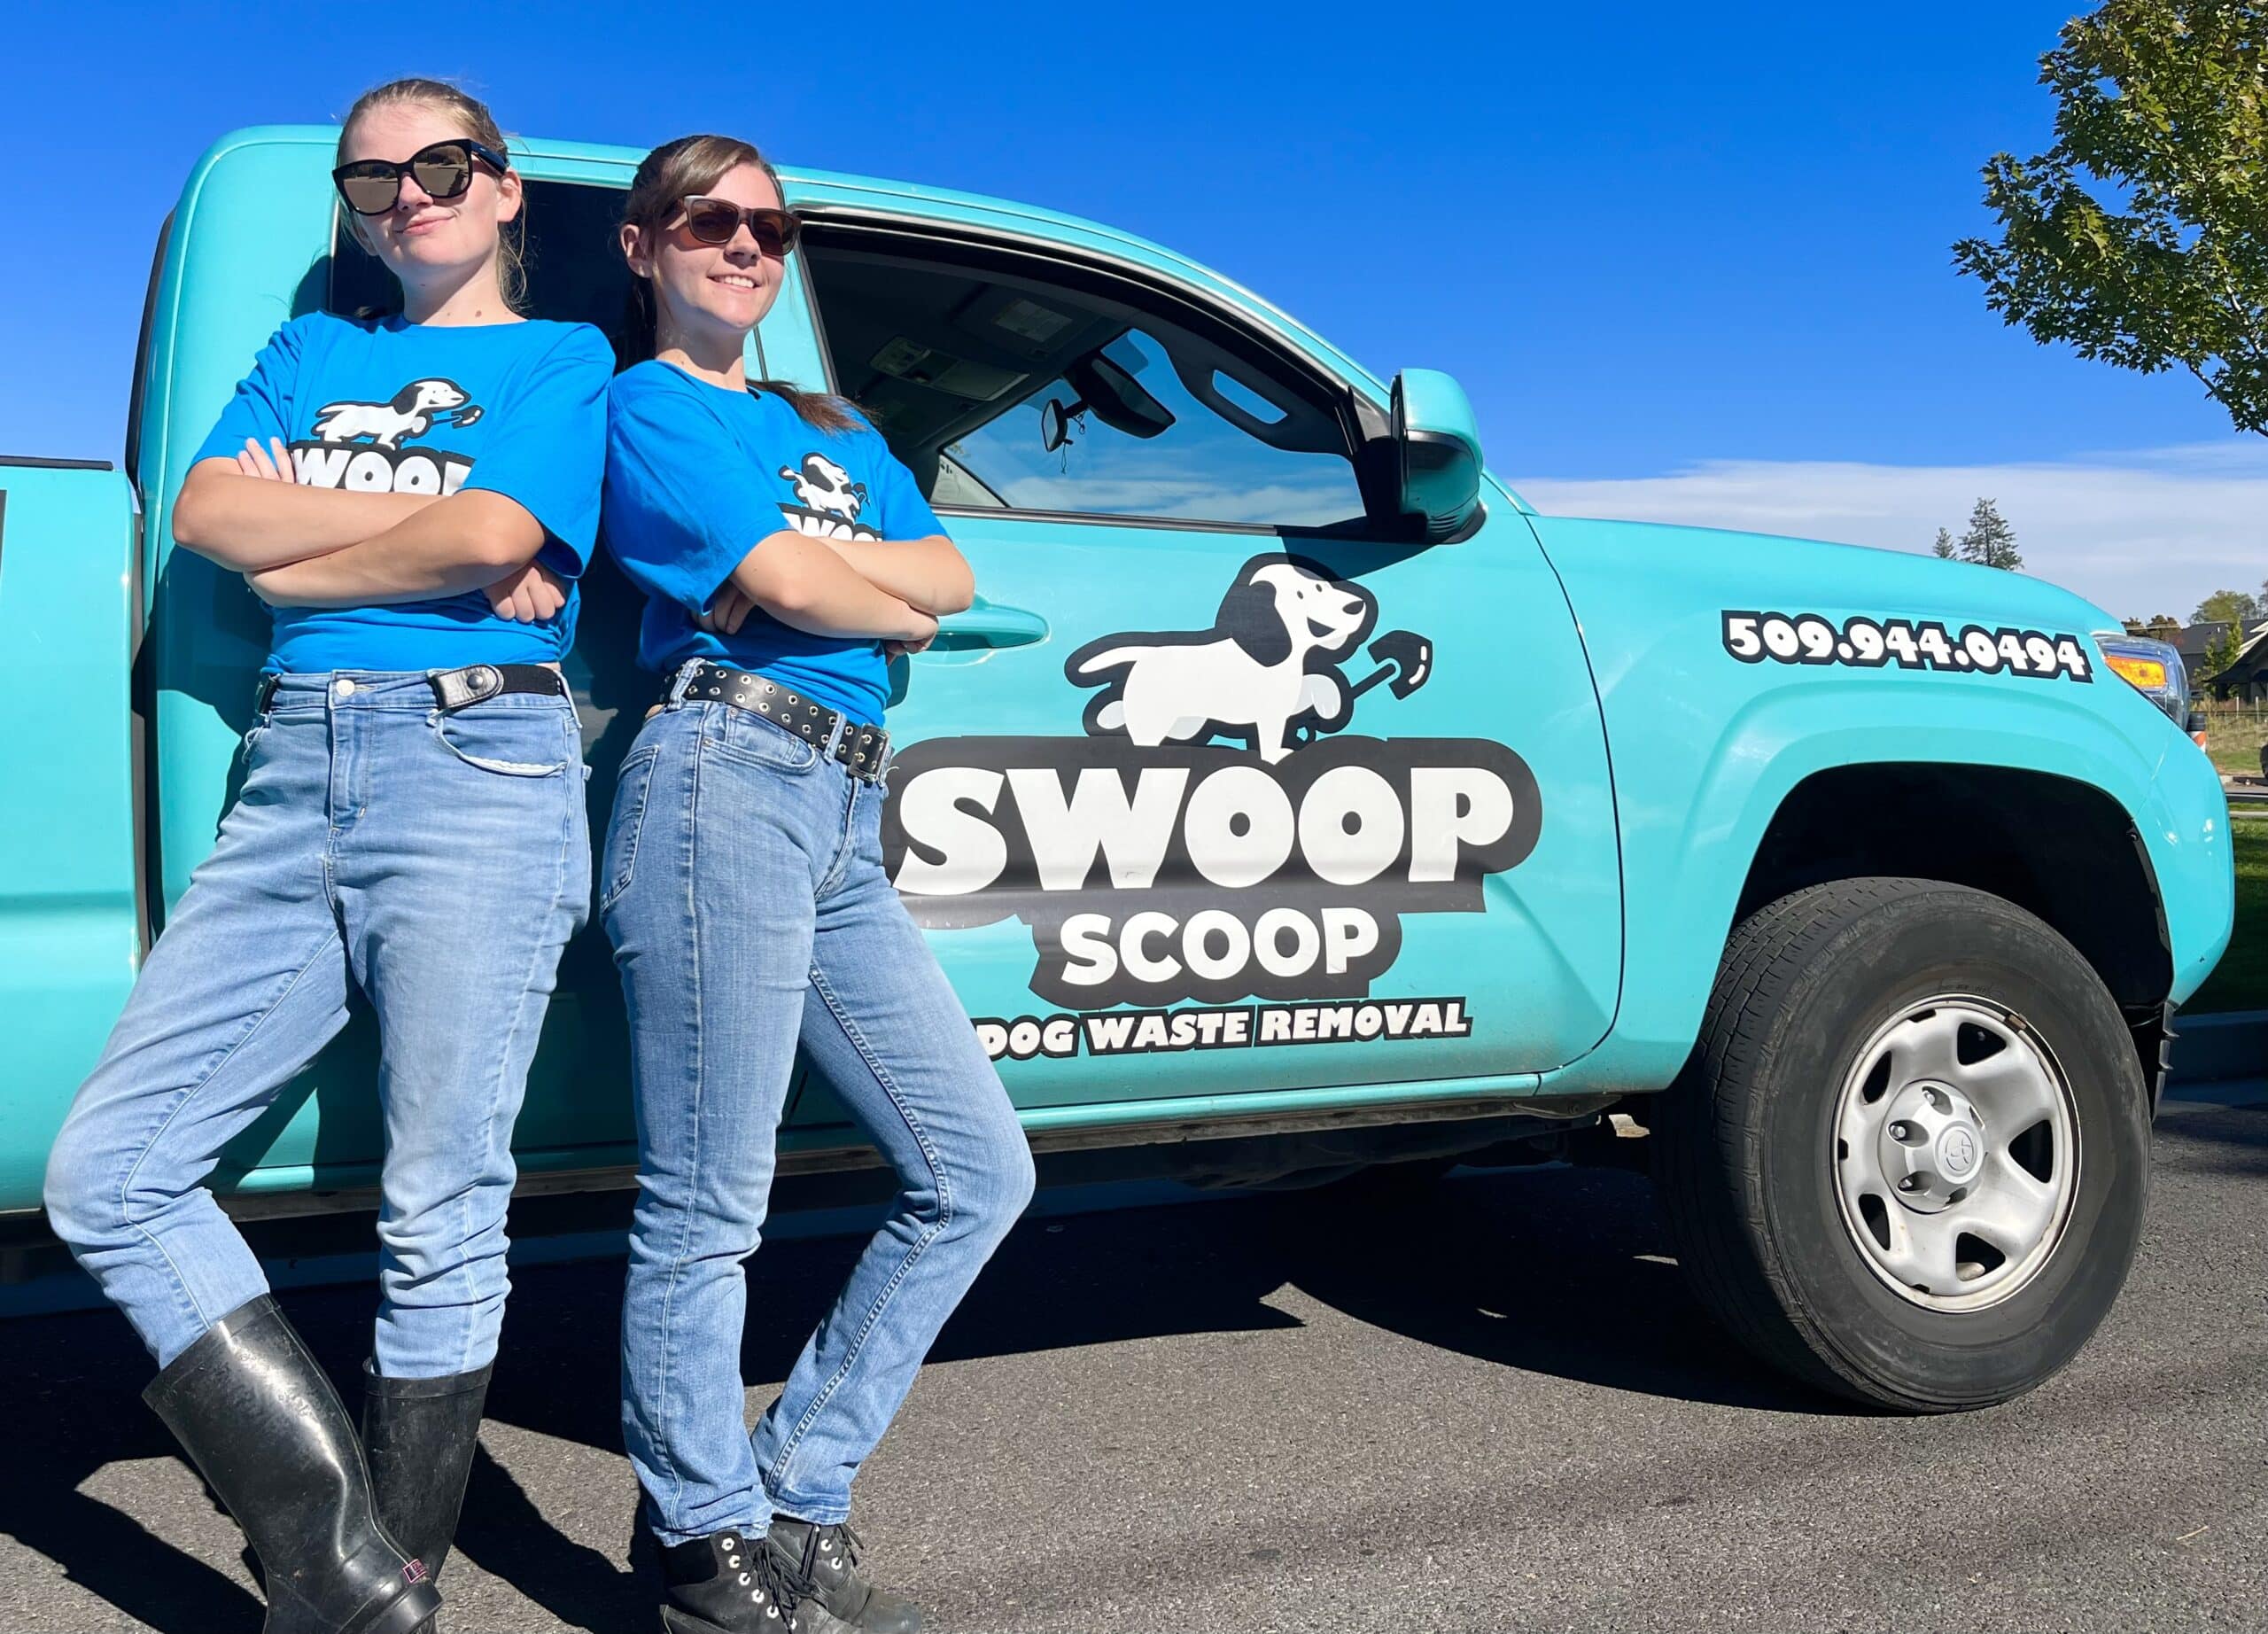 Pooper Scooper Team Members standing in front of a swoop scoop dog waste removal truck with sunglasses on.